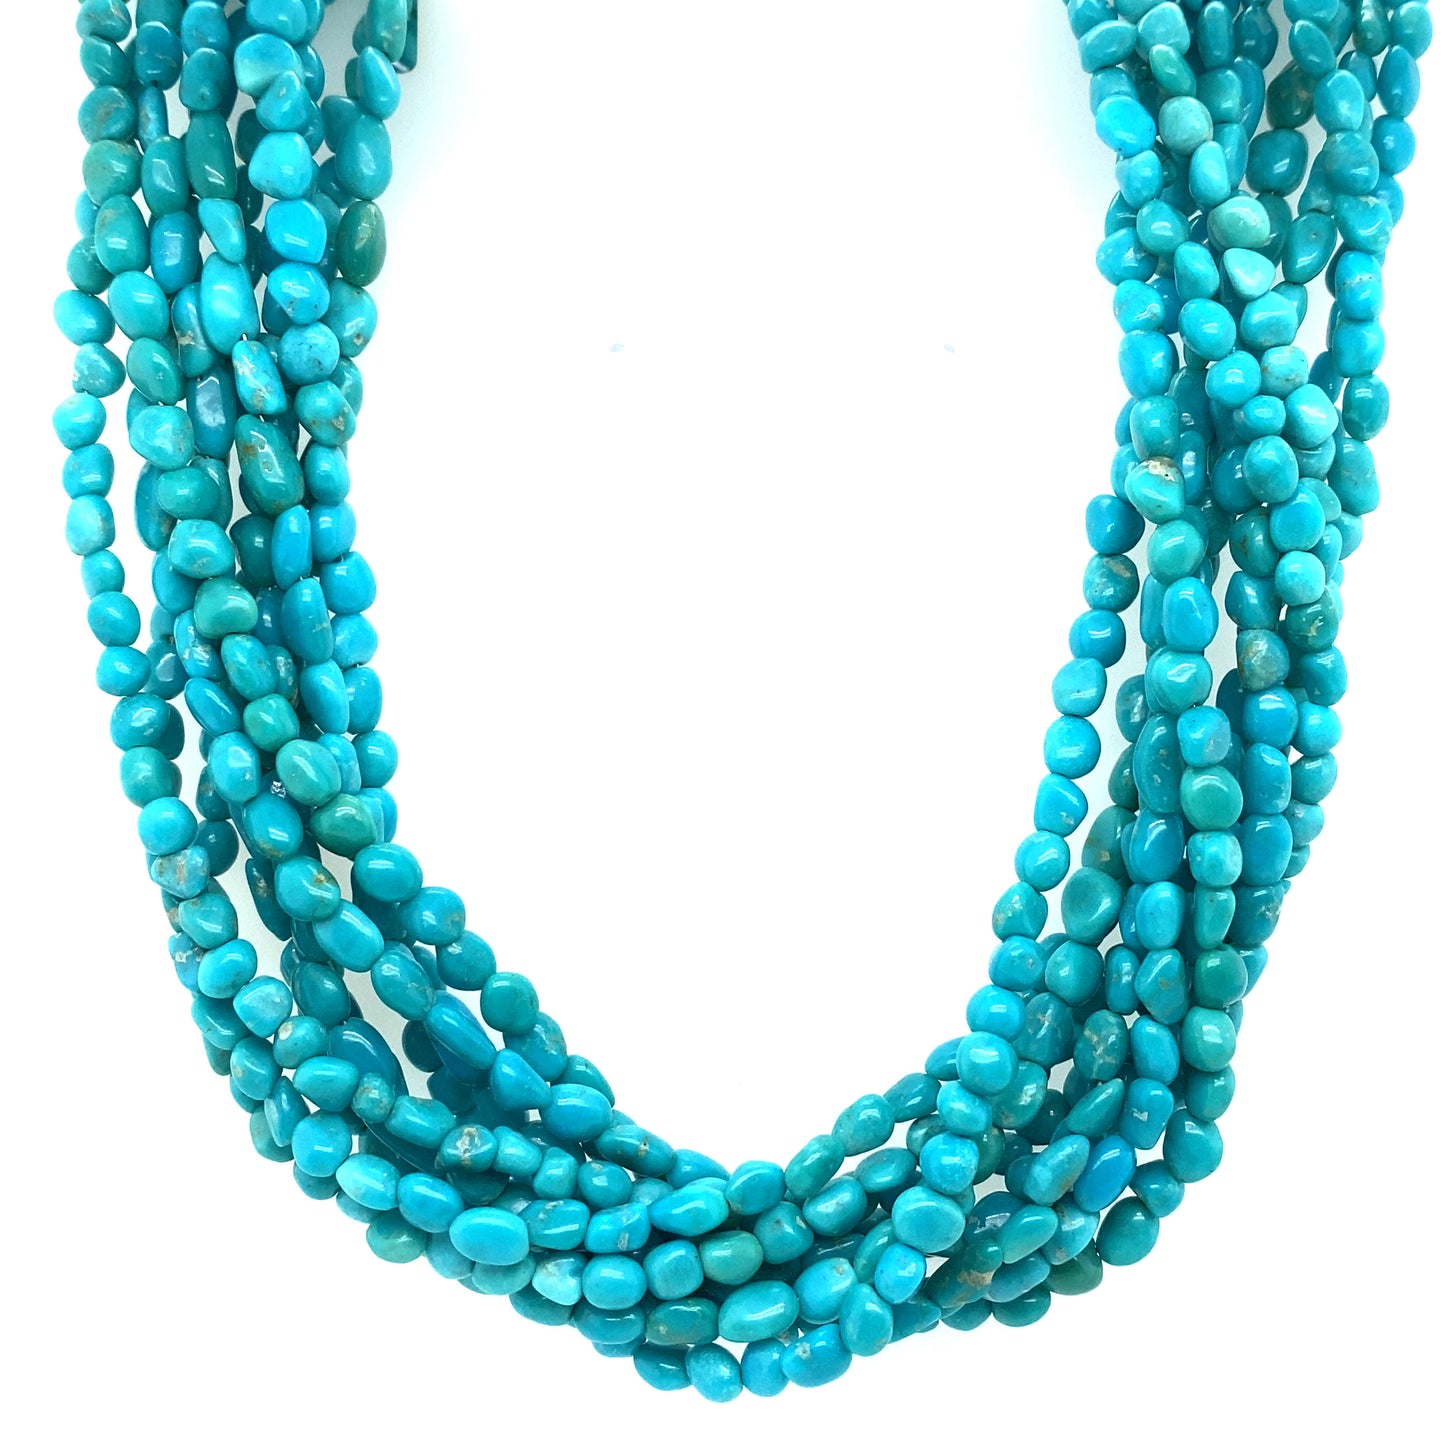 Circa 1970s Southwestern Multi Strand Turquoise Necklace in Sterling Silver